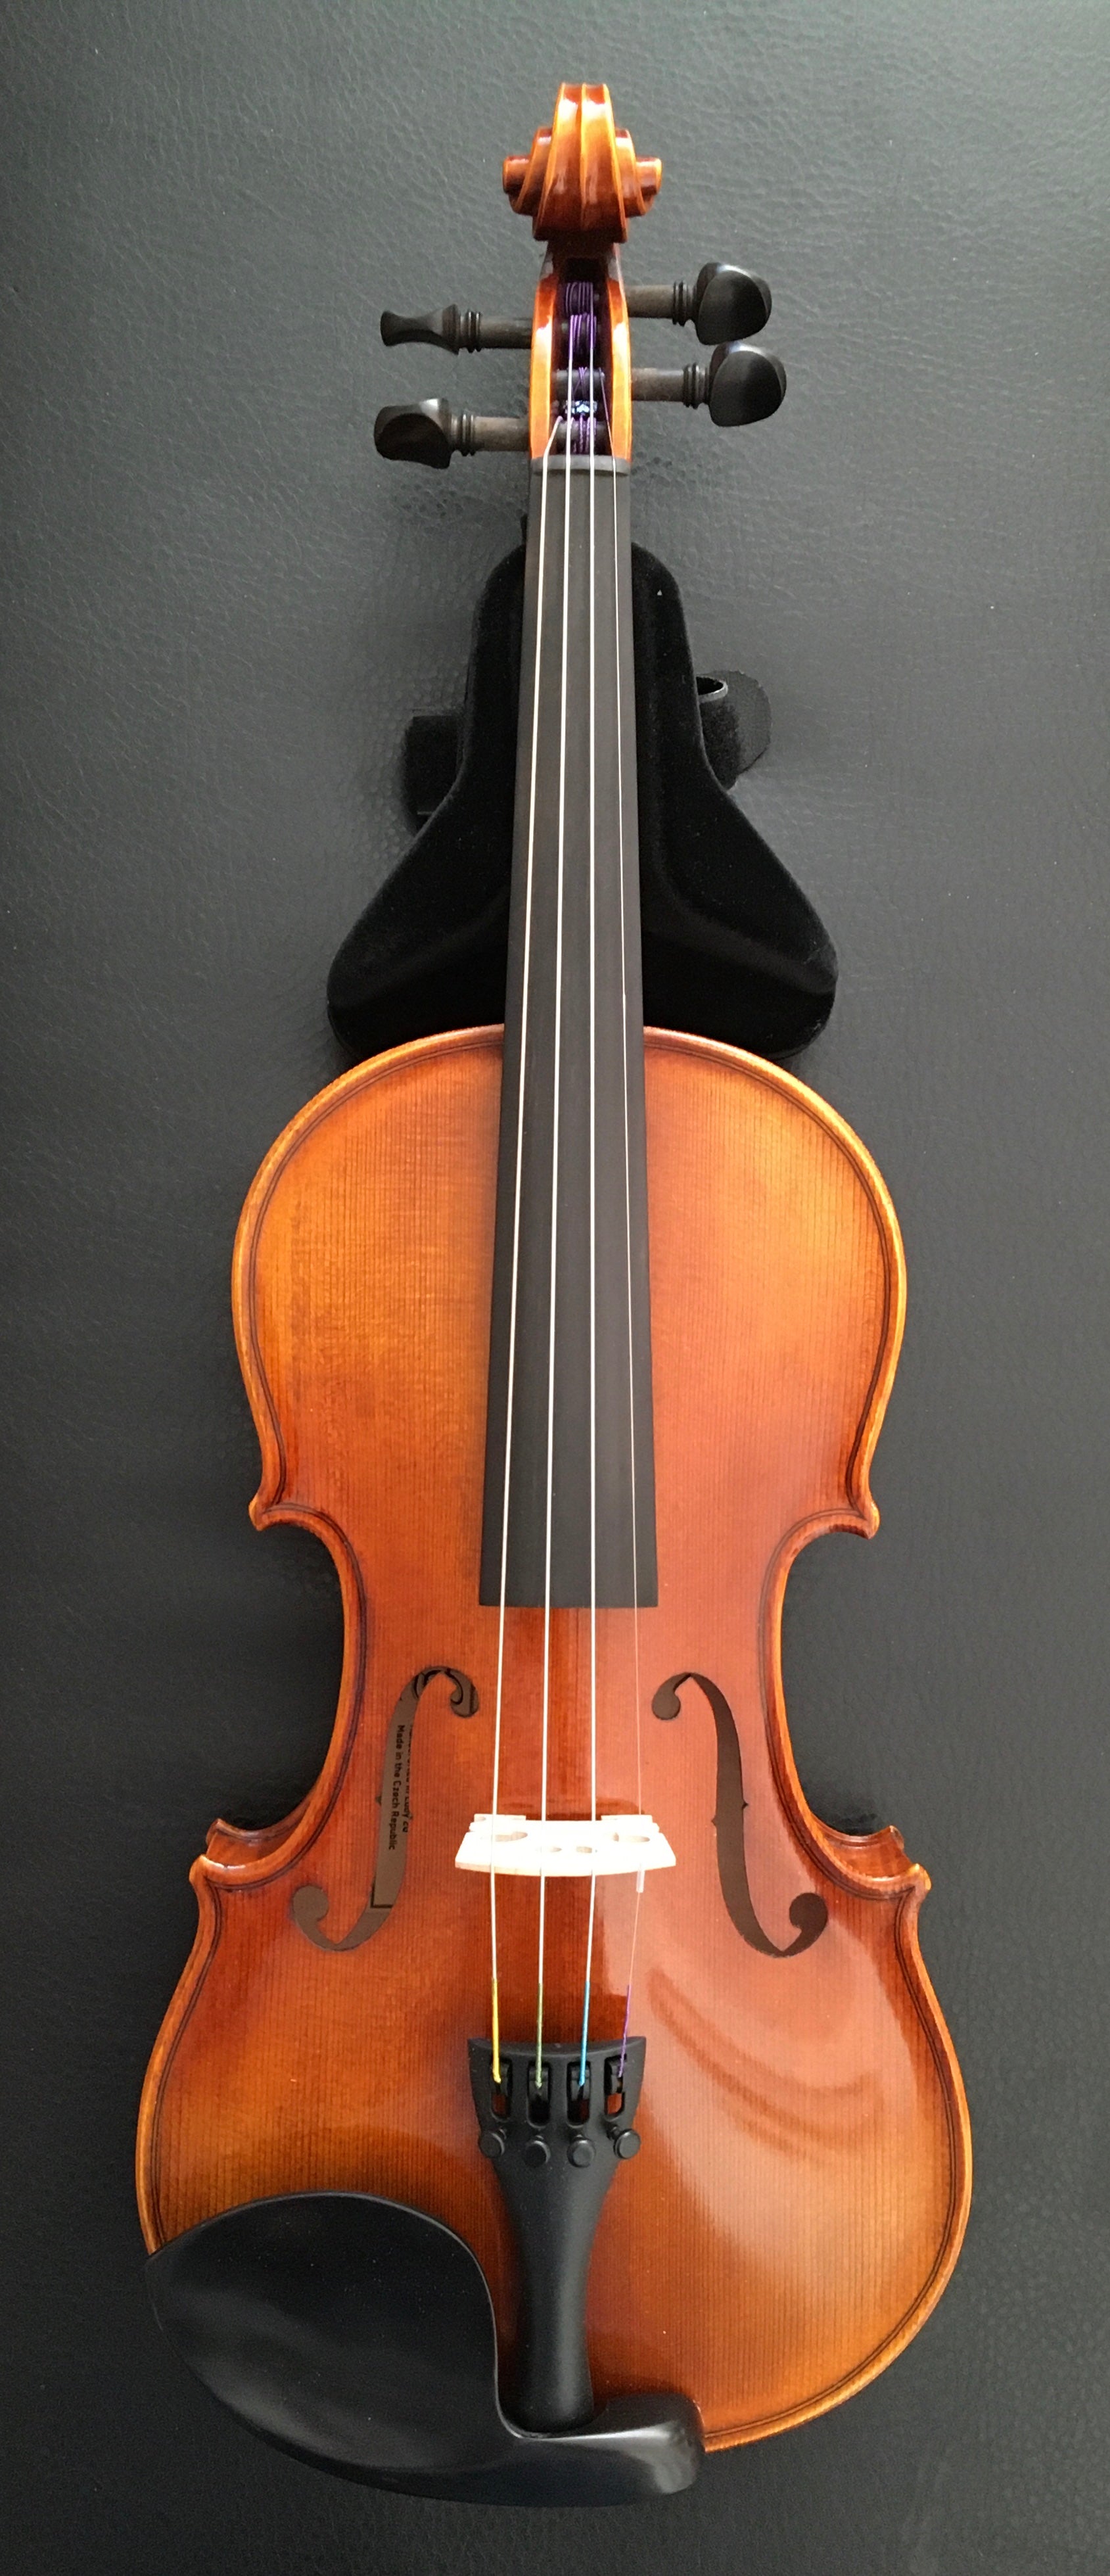 Harald Lorenz 3 Violin Outfit, 4/4 Strings, Bows & More